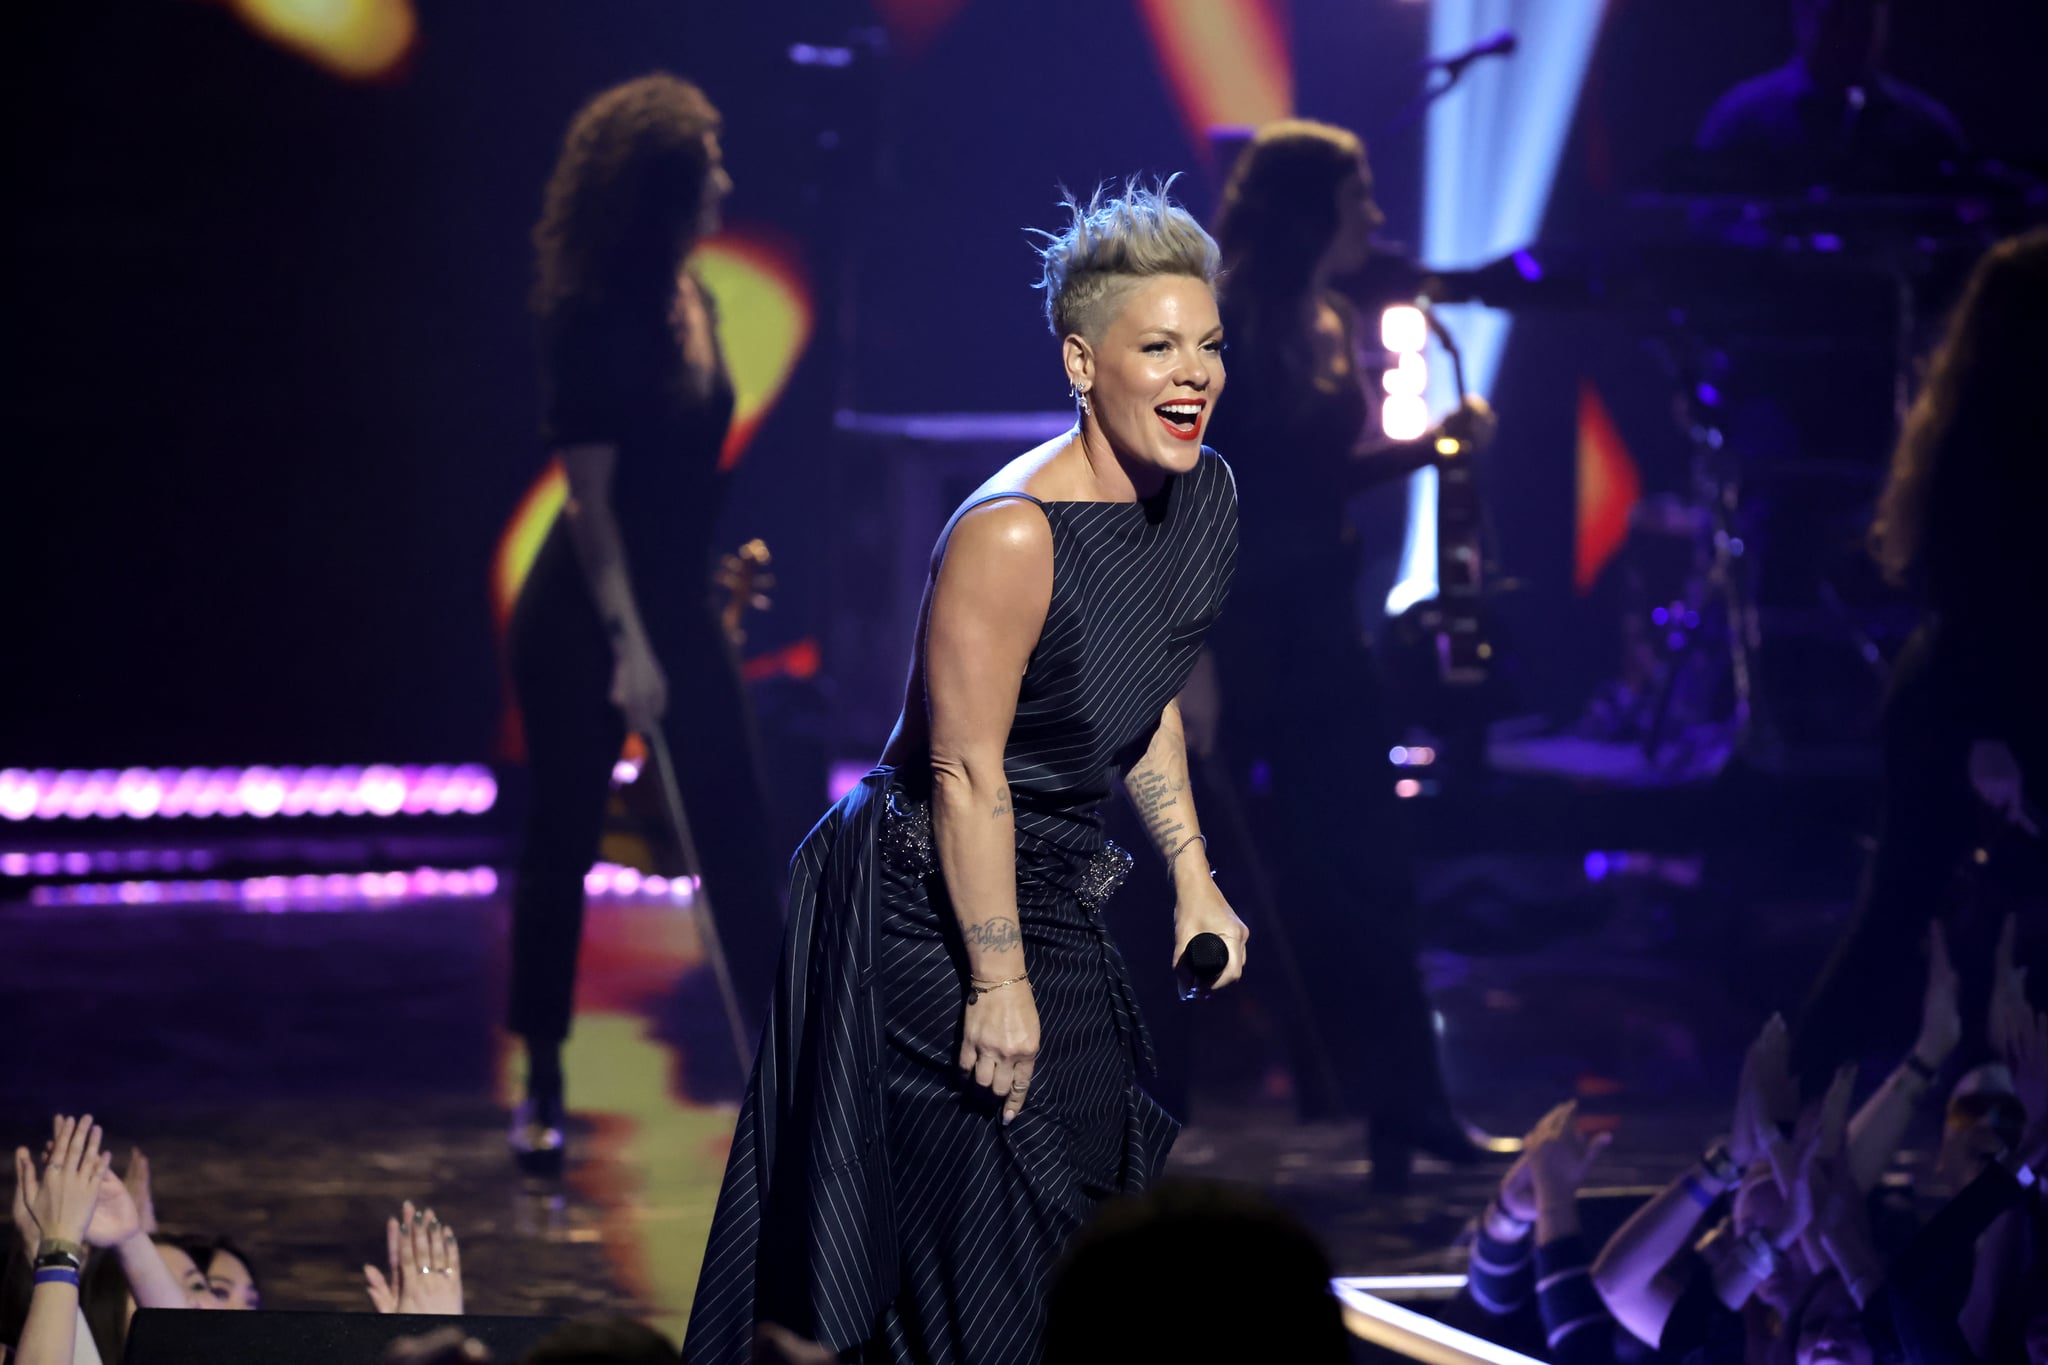 LOS ANGELES, CALIFORNIA - MARCH 27: (FOR EDITORIAL USE ONLY) P!NK performs onstage during the 2023 iHeartRadio Music Awards at Dolby Theatre in Los Angeles, California on March 27, 2023. Broadcasted live on FOX. (Photo by Kevin Winter/Getty Images for iHeartRadio)